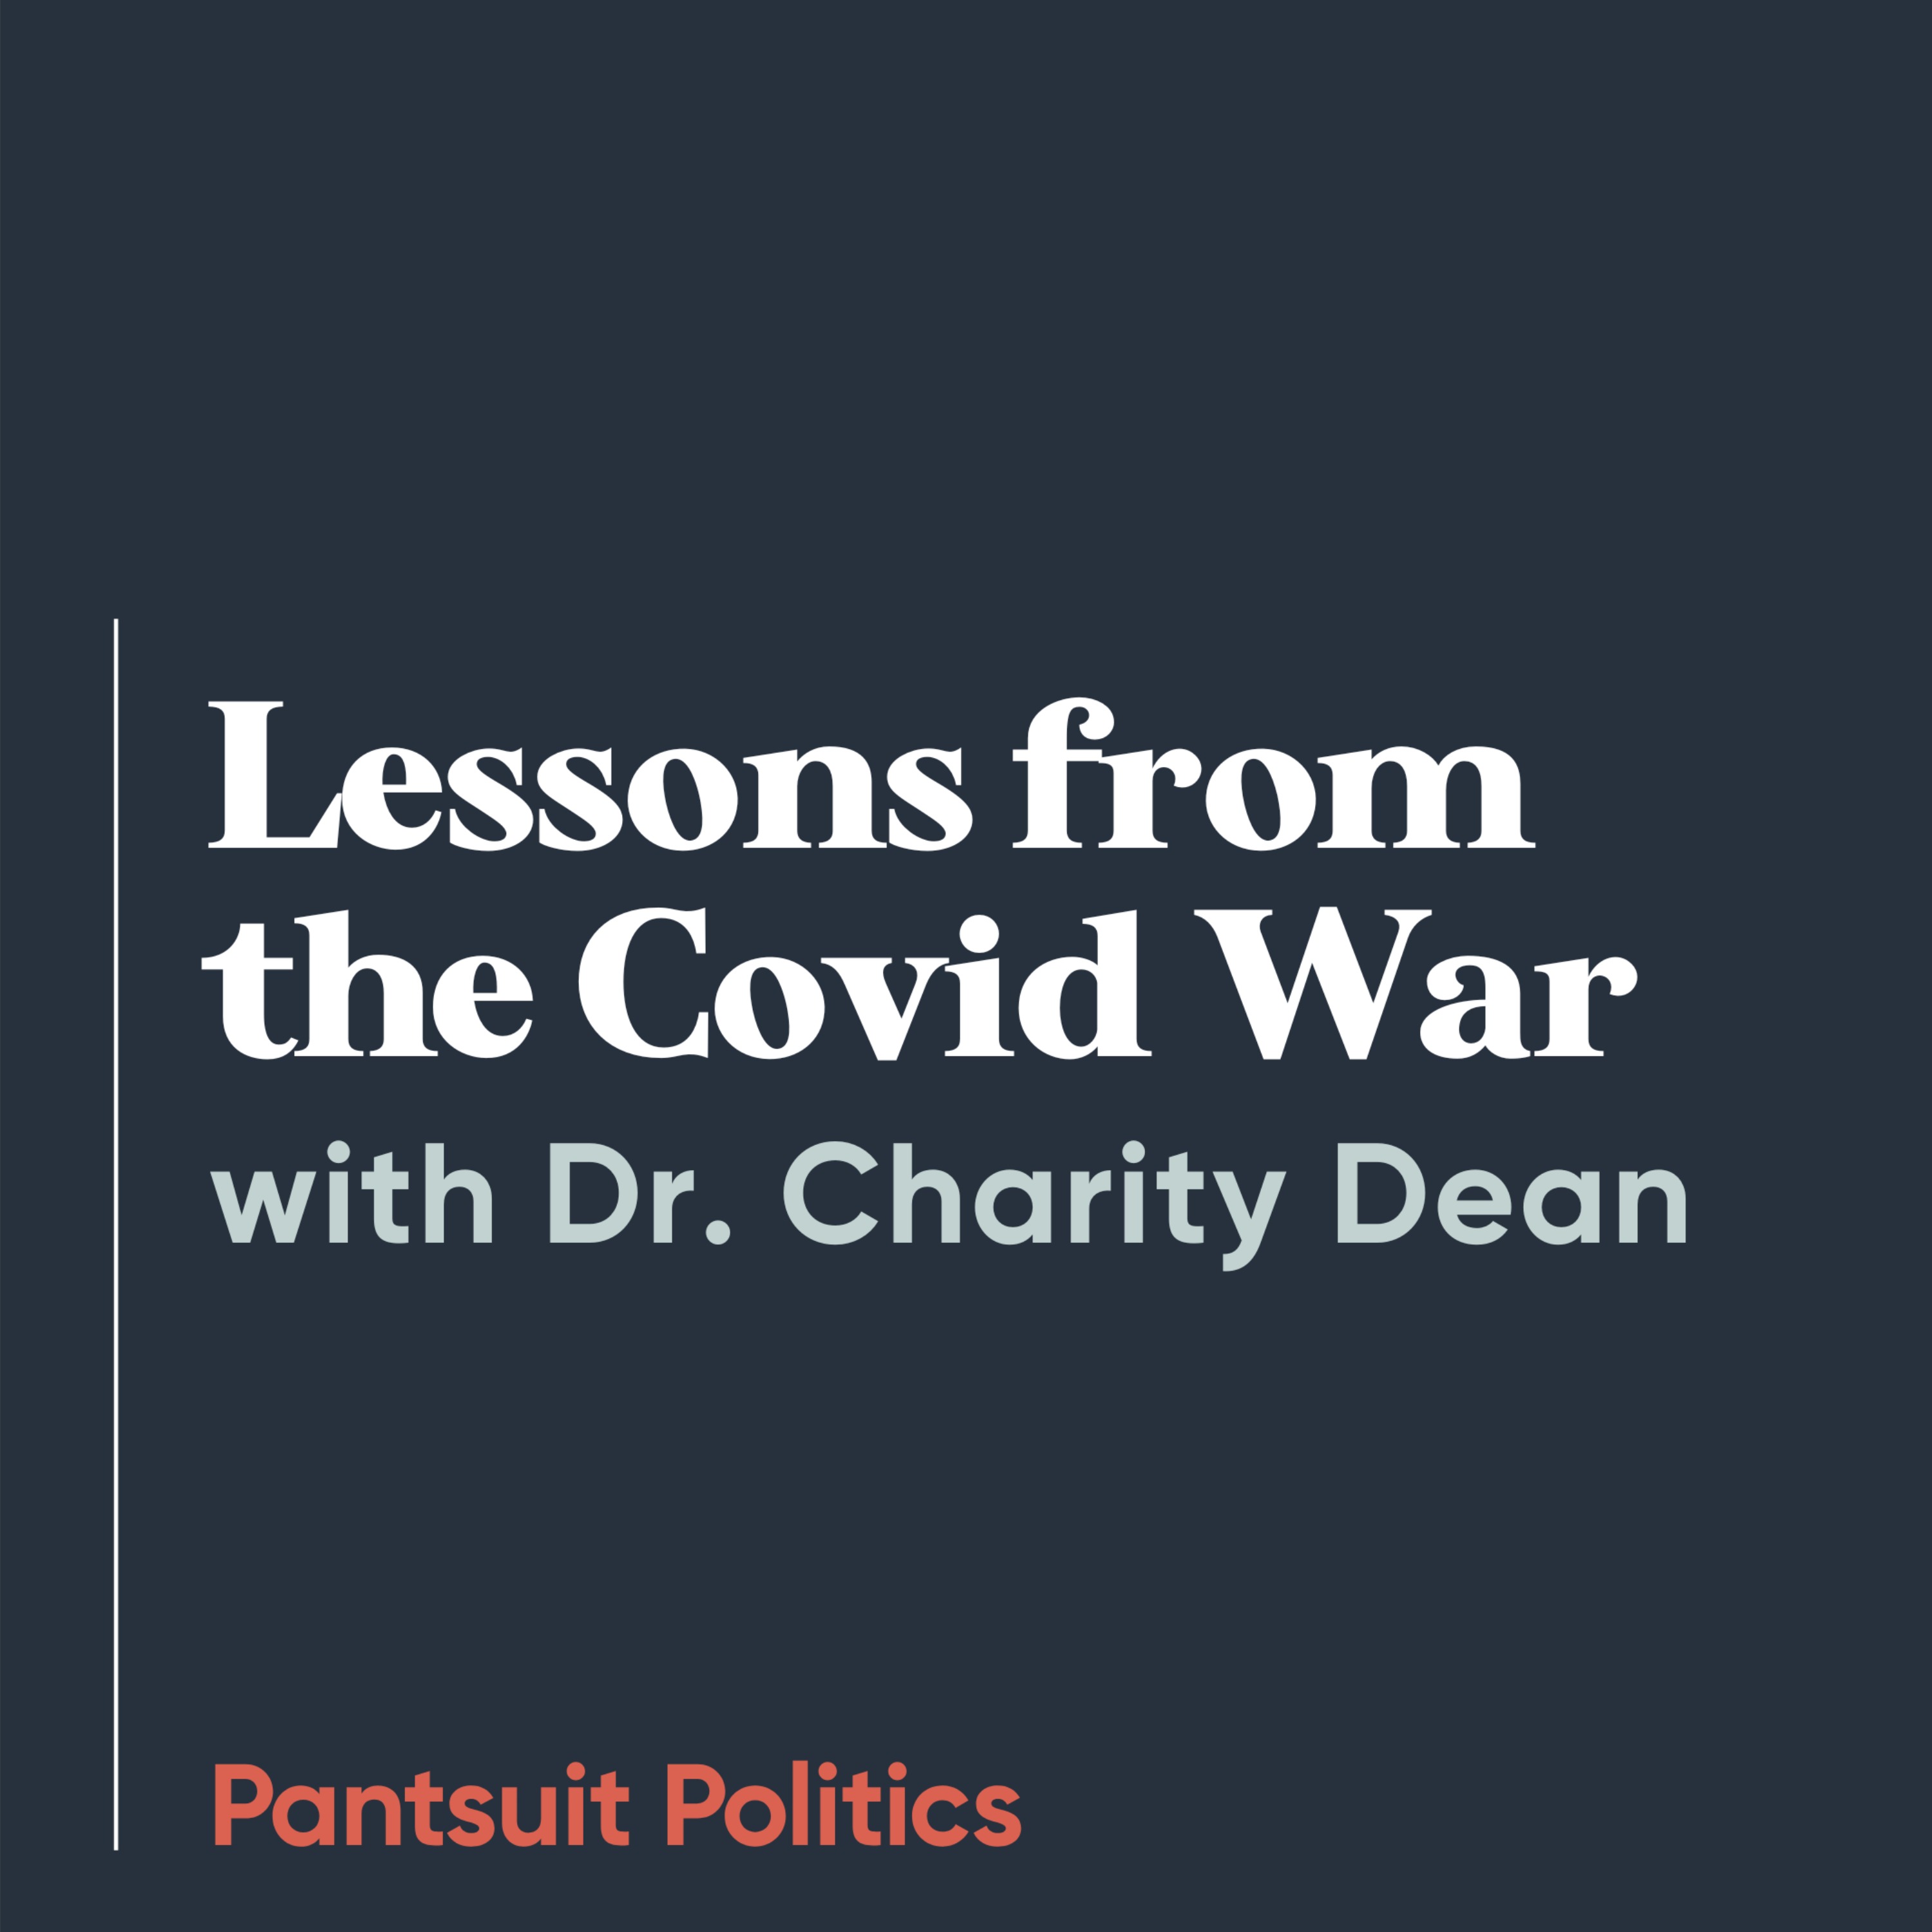 Lessons from the Covid War with Dr. Charity Dean